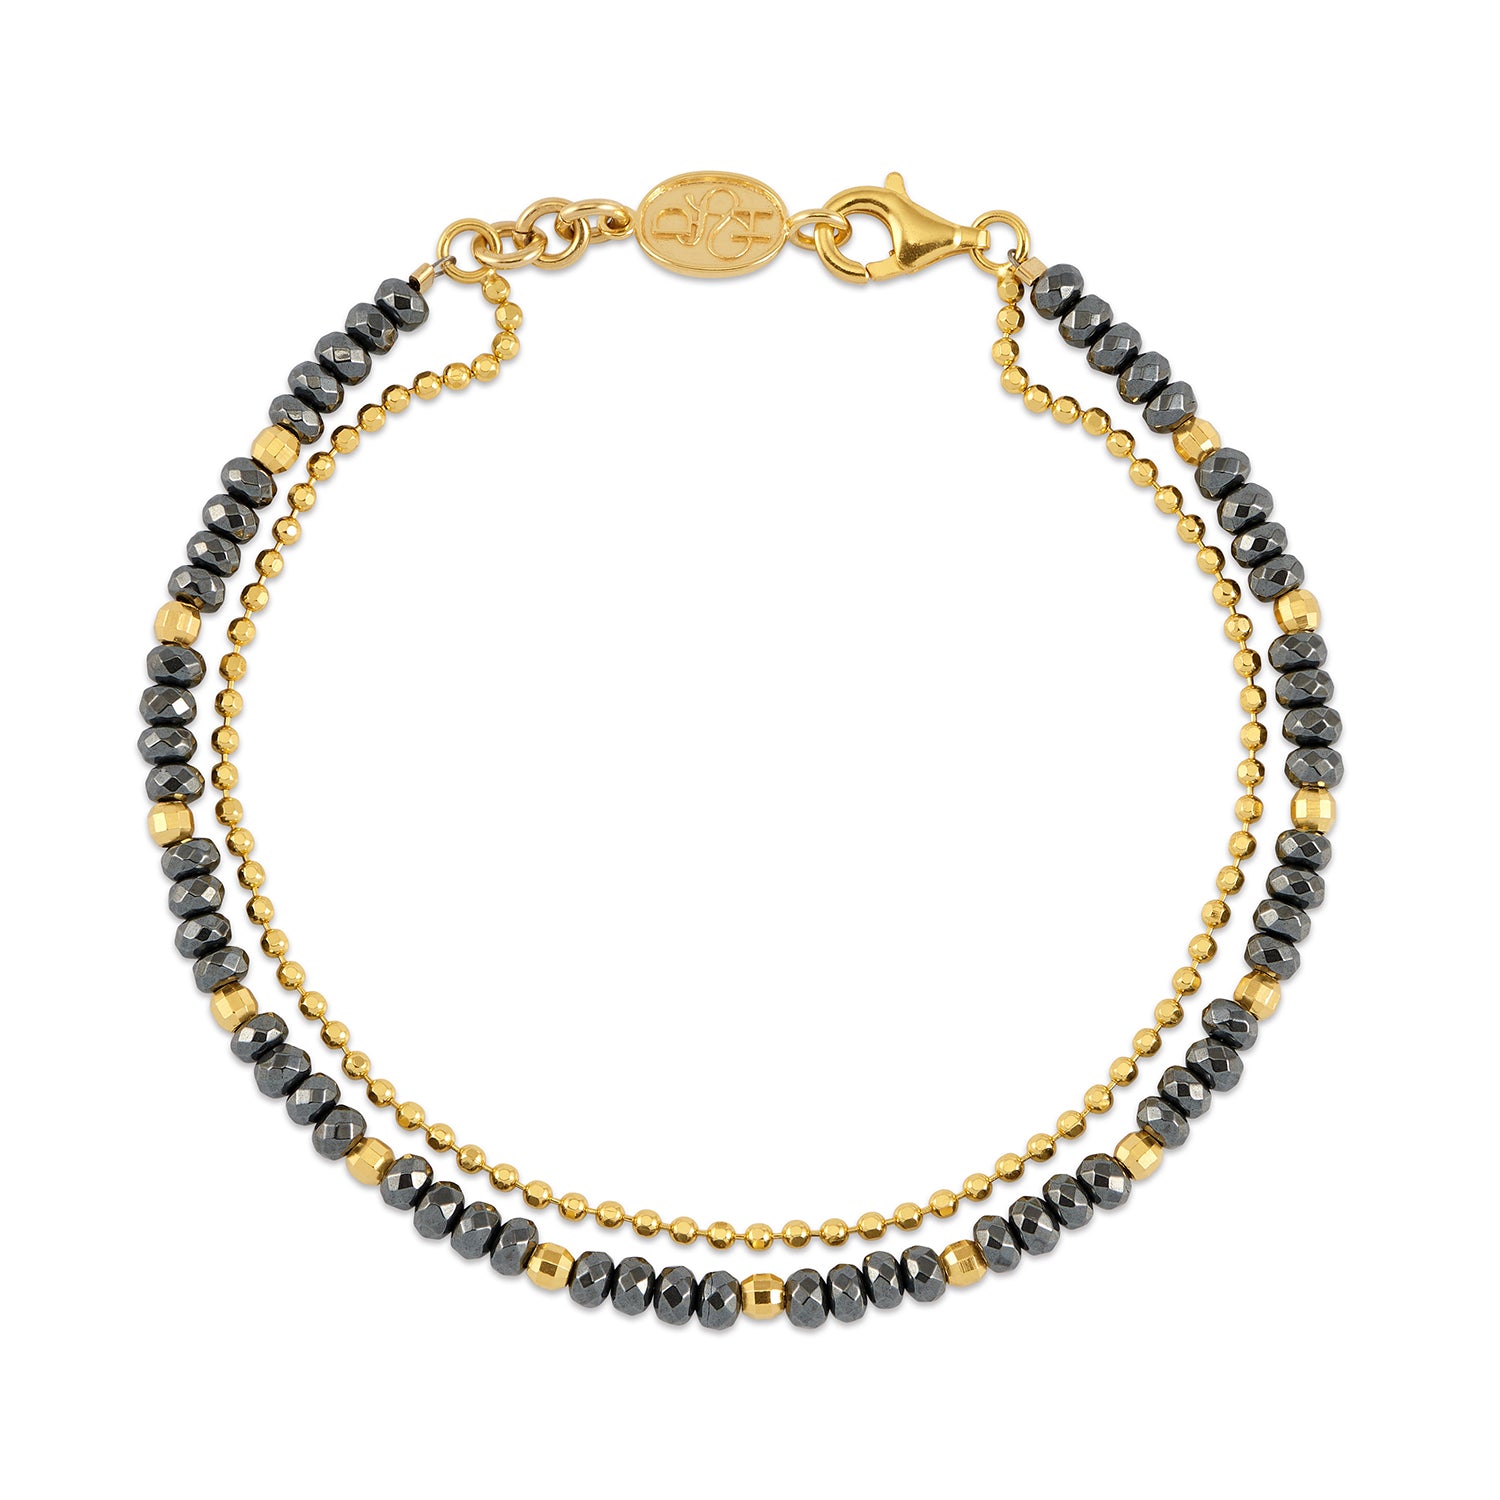 Bewitched Faceted Bead Orissa Bracelet